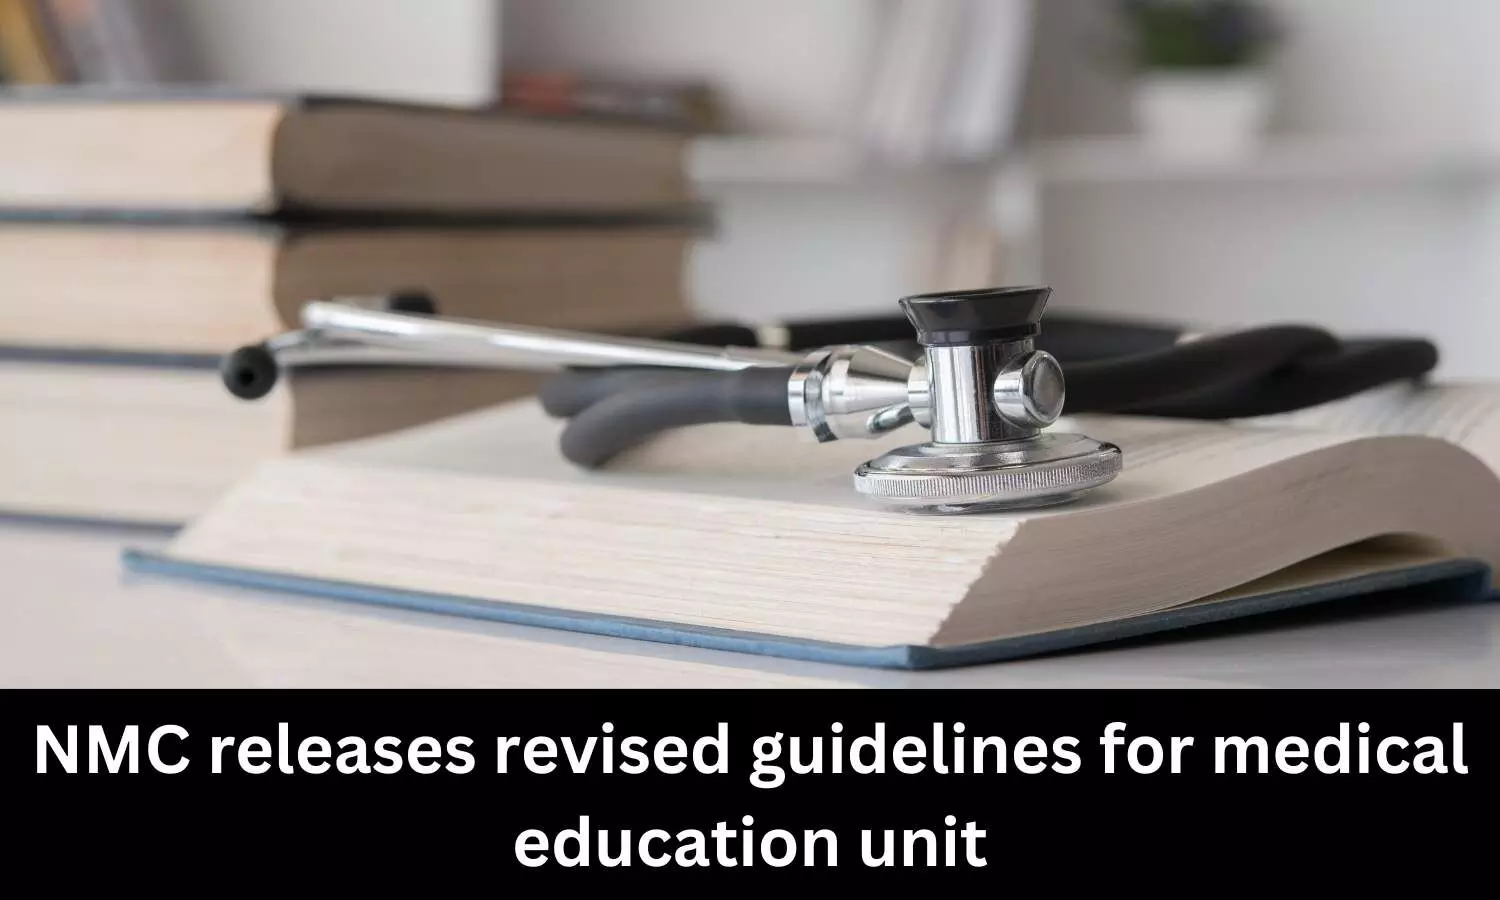 NMC releases revised guidelines for medical education unit